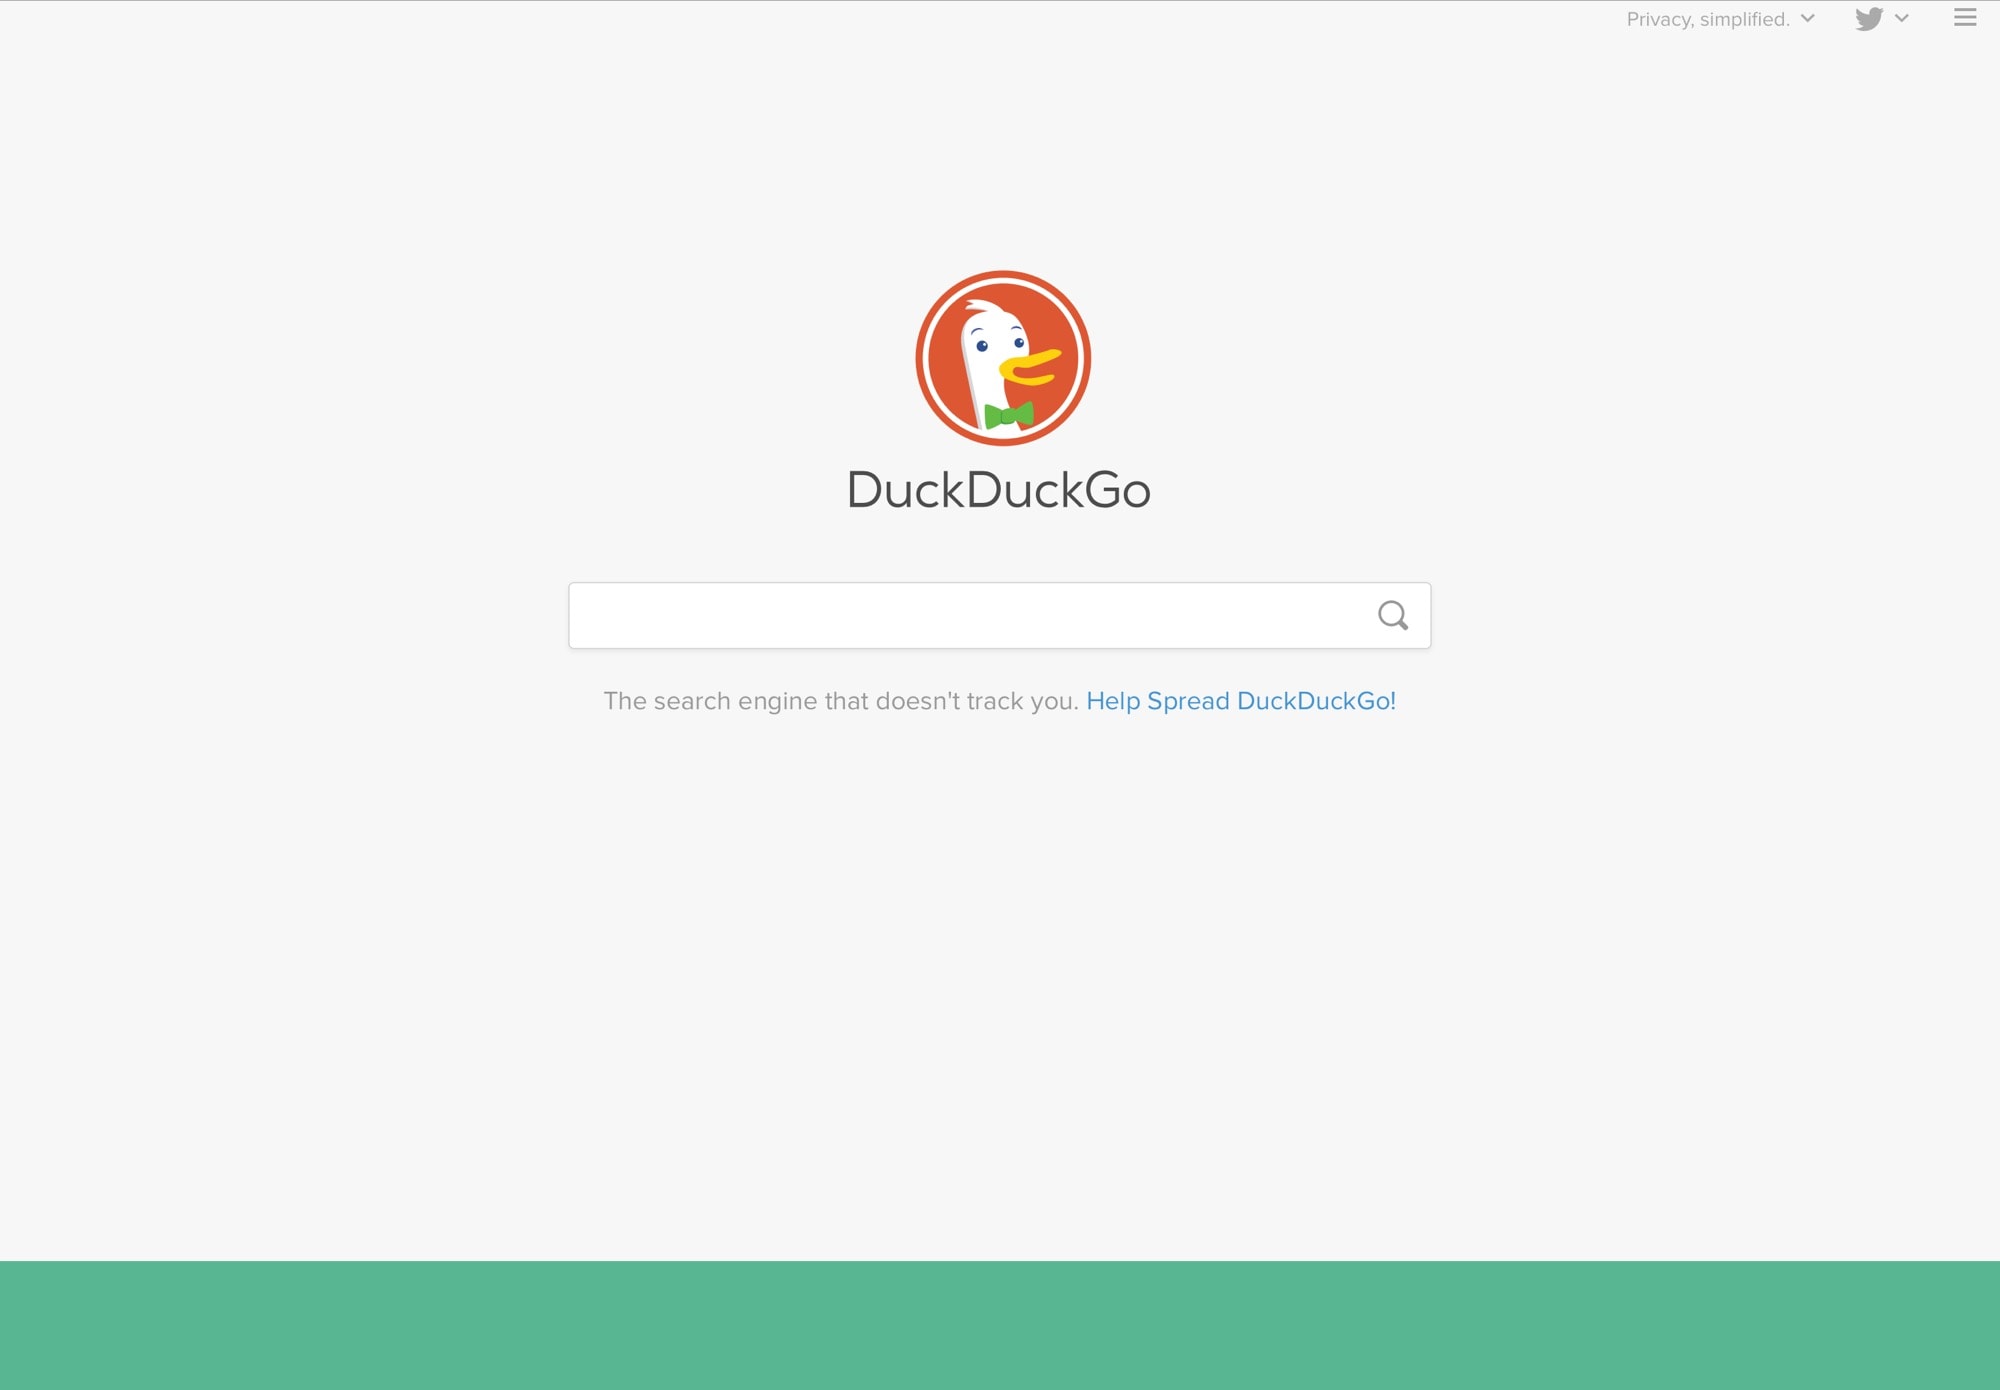 The DuckDuckGo interface looks nice and clean.